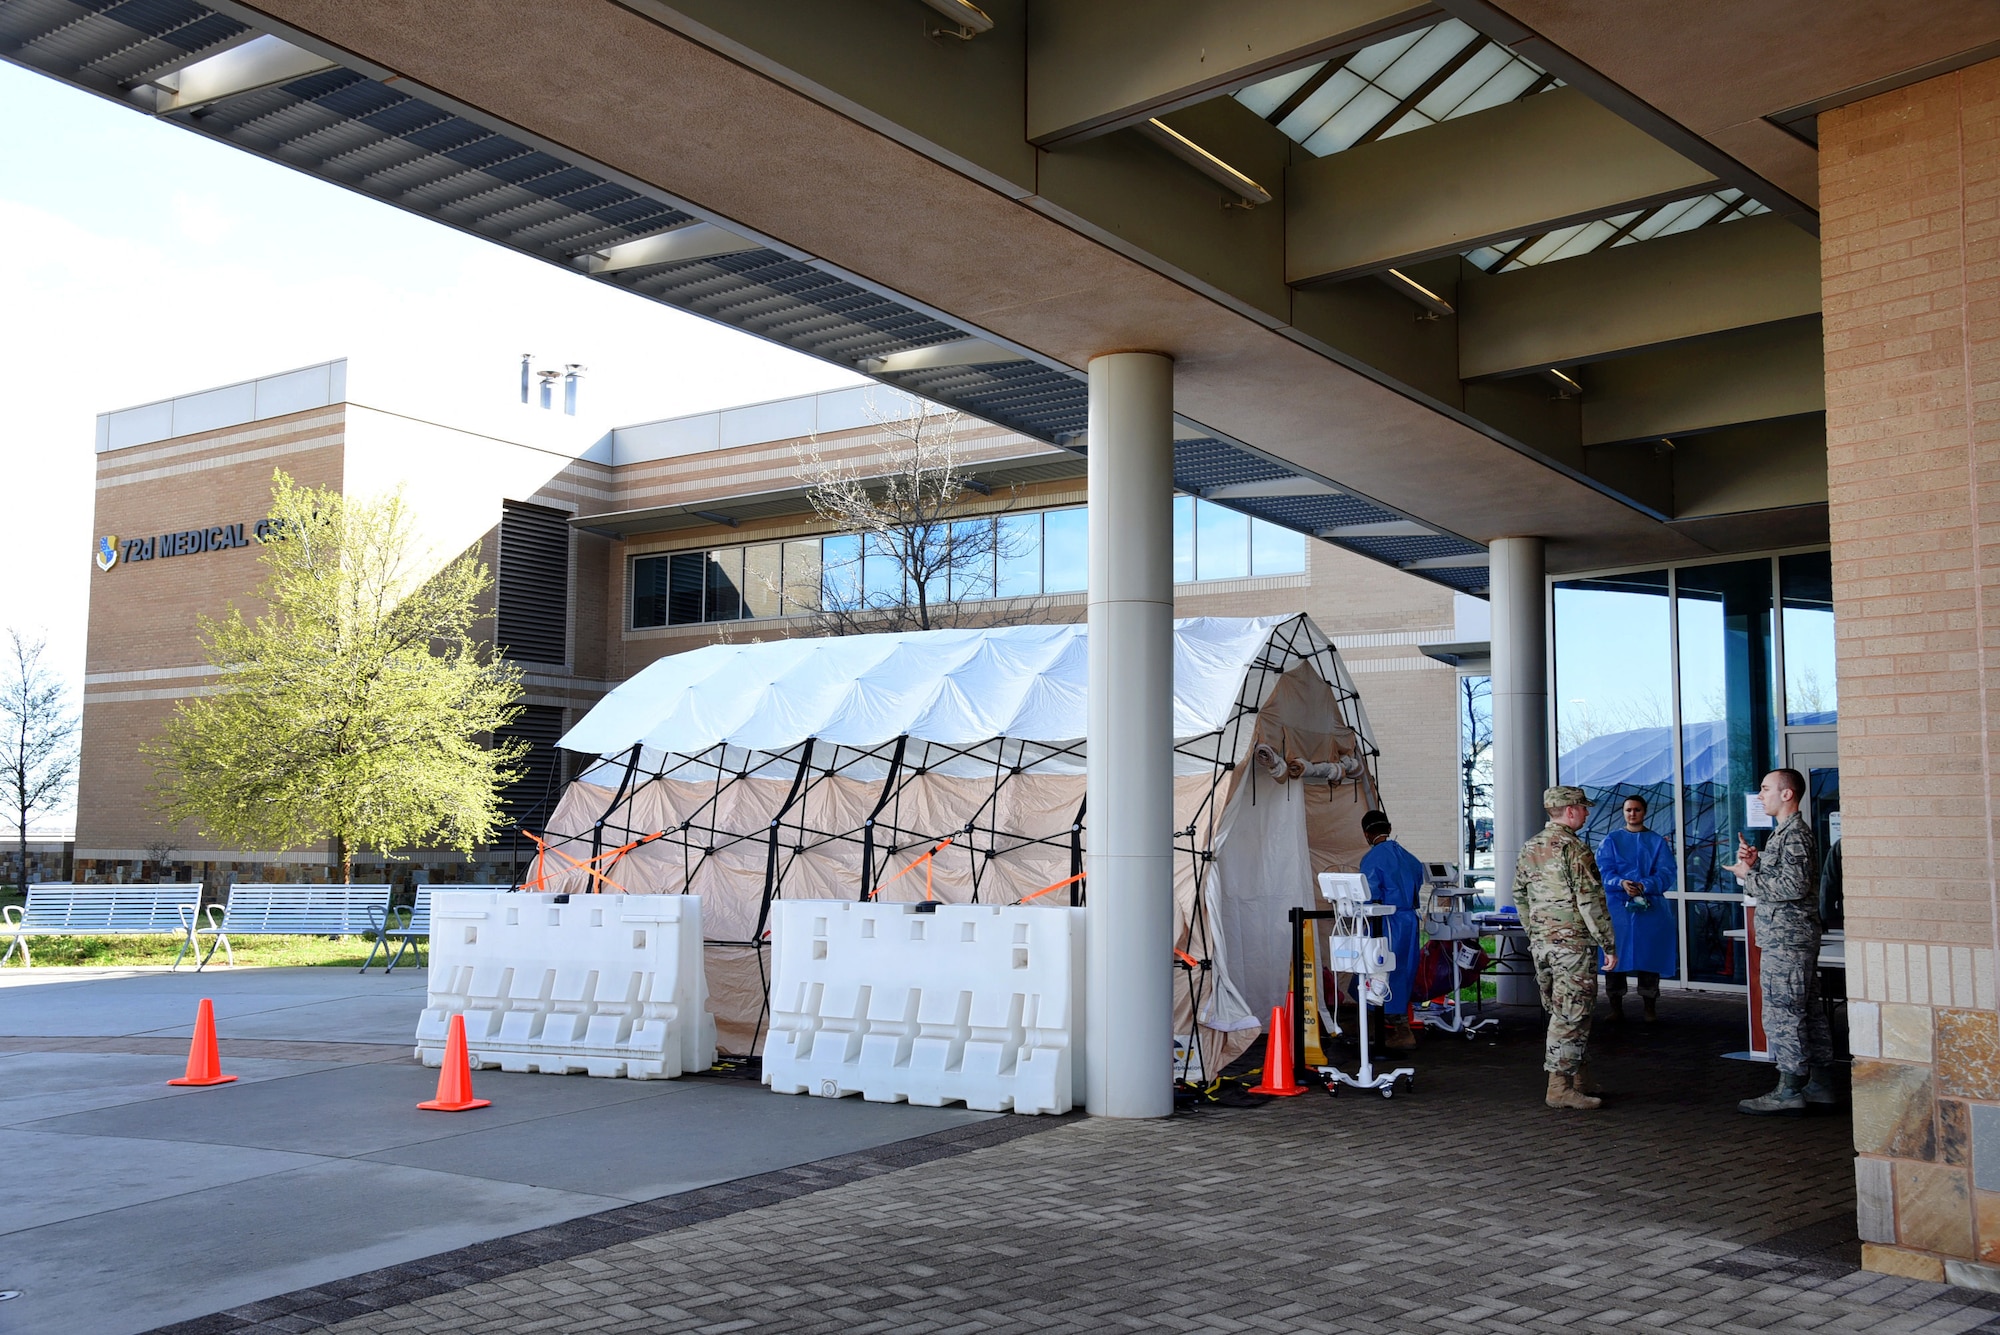 A sick tent has been installed at the front entrance of the 72nd Medical Group clinic. Medical personnel ask each incoming patient several questions to determine their path for medical care. If an individual is suspected for COVID-19, symptomatic or not, they are asked to stay in their vehicles while medical personnel dressed in containment gear asks them more extensive questions. If an individual is experiencing allergies or other upper-respiratory symptoms, they will enter a bay in the sick tent to be further evaluated. This will prevent them from entering the clinic and spreading any contamination, even if it's just a cold or flu